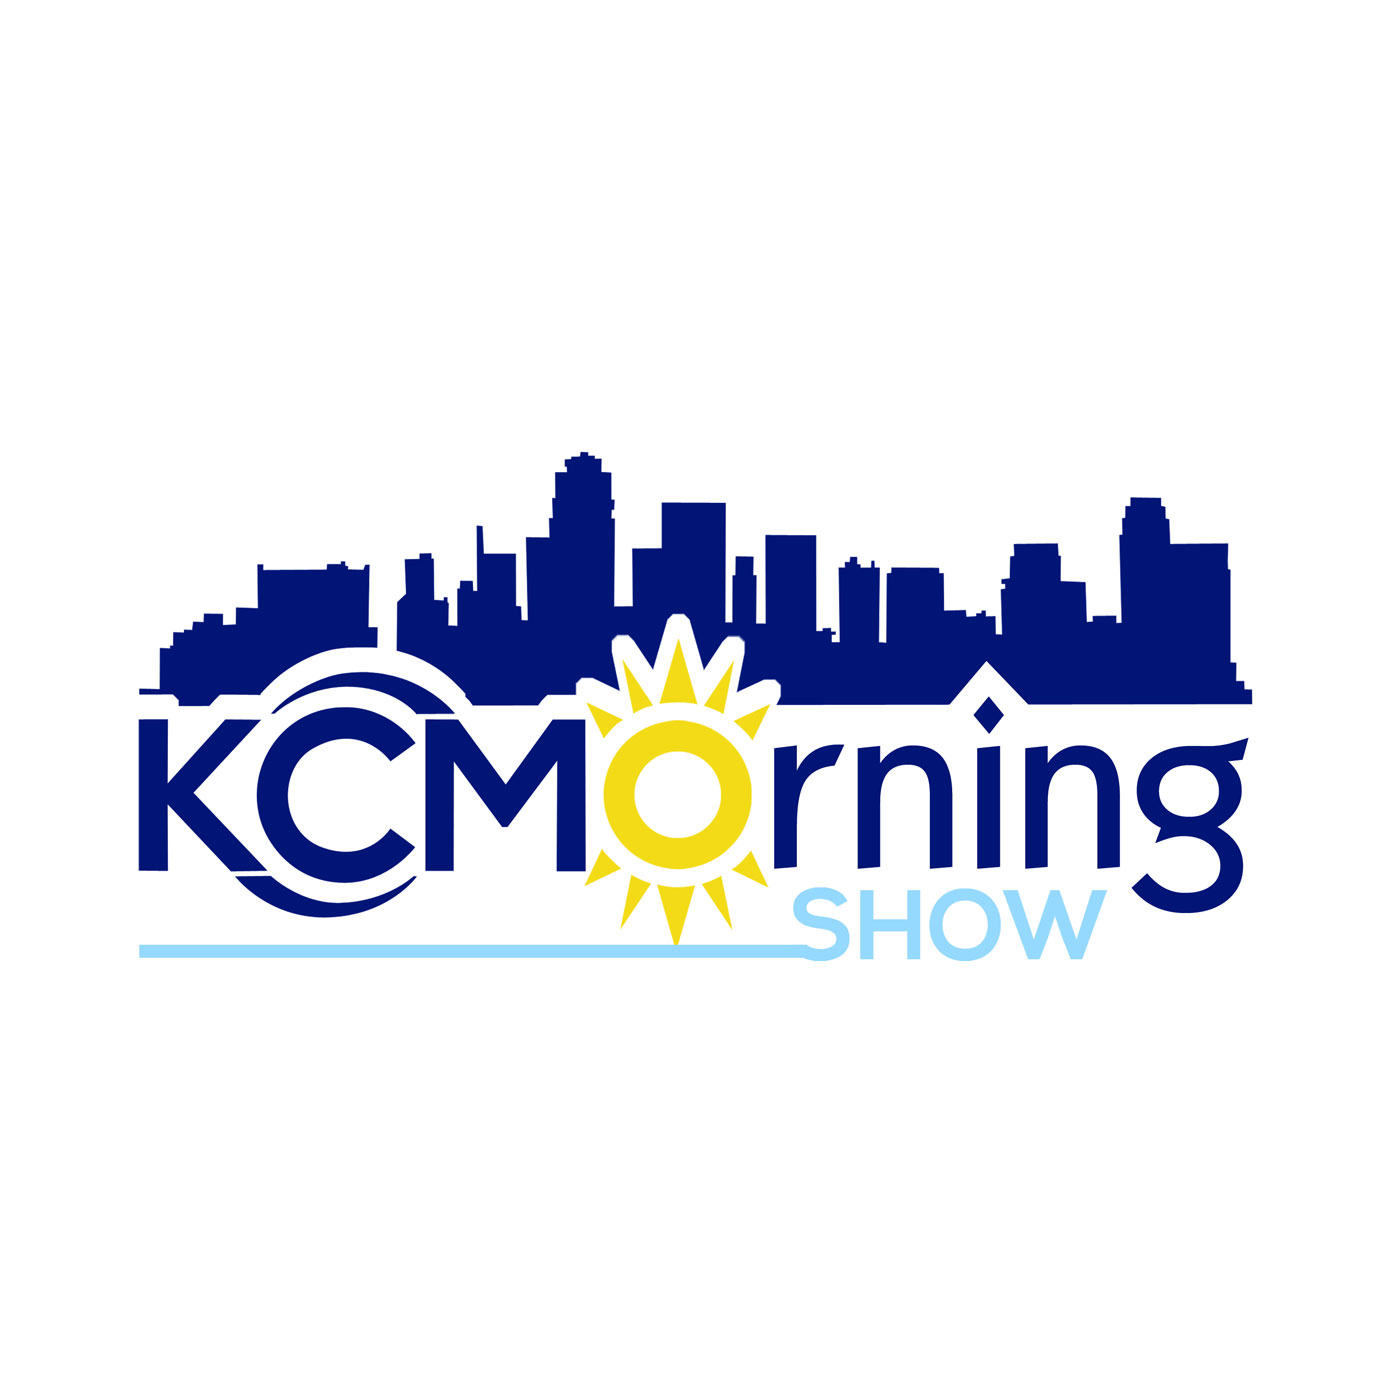 The KC Morning Show